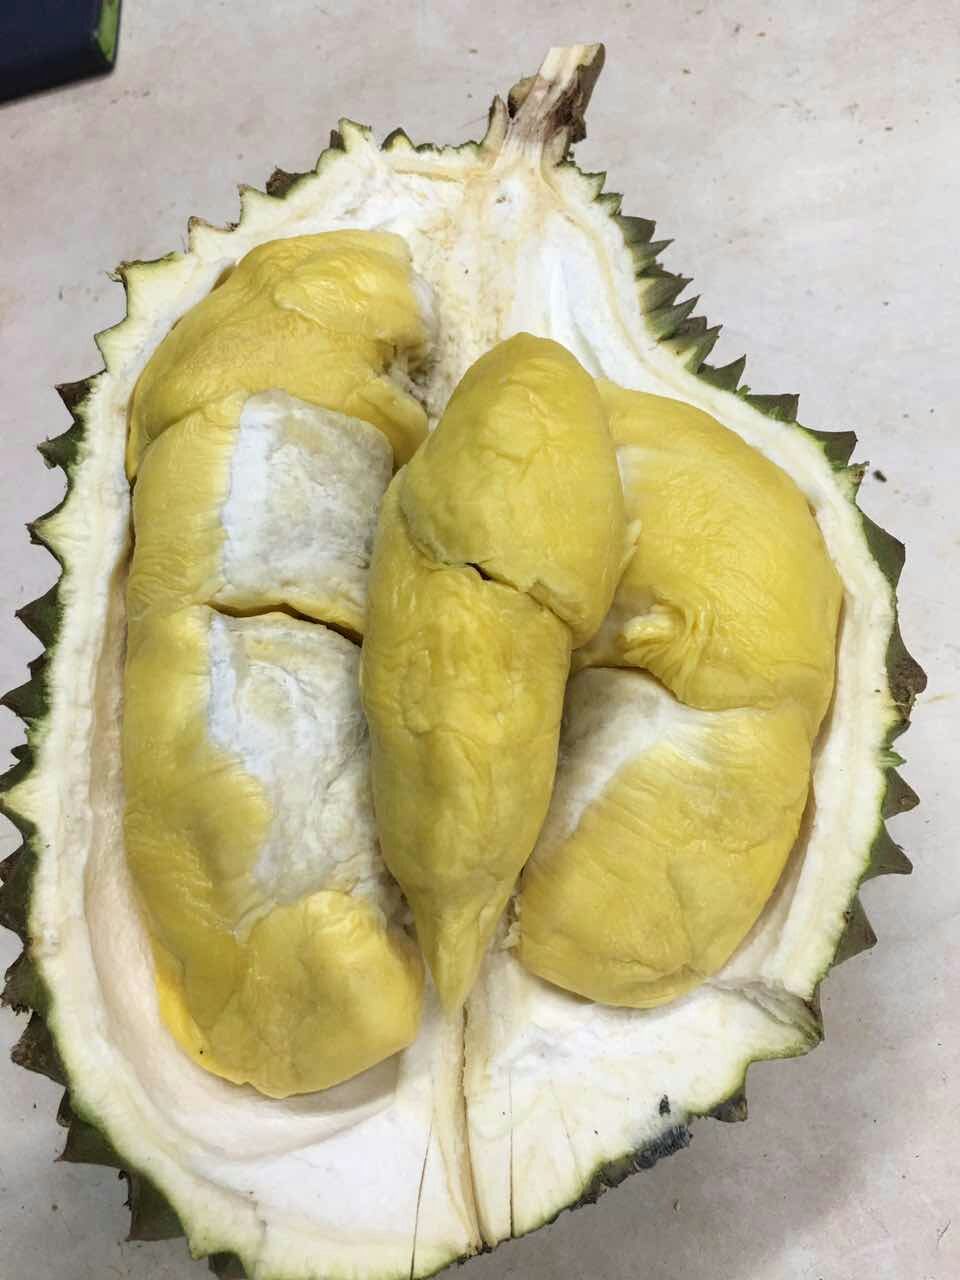 Durianlicious: Penang Durian In Singapore? Really?